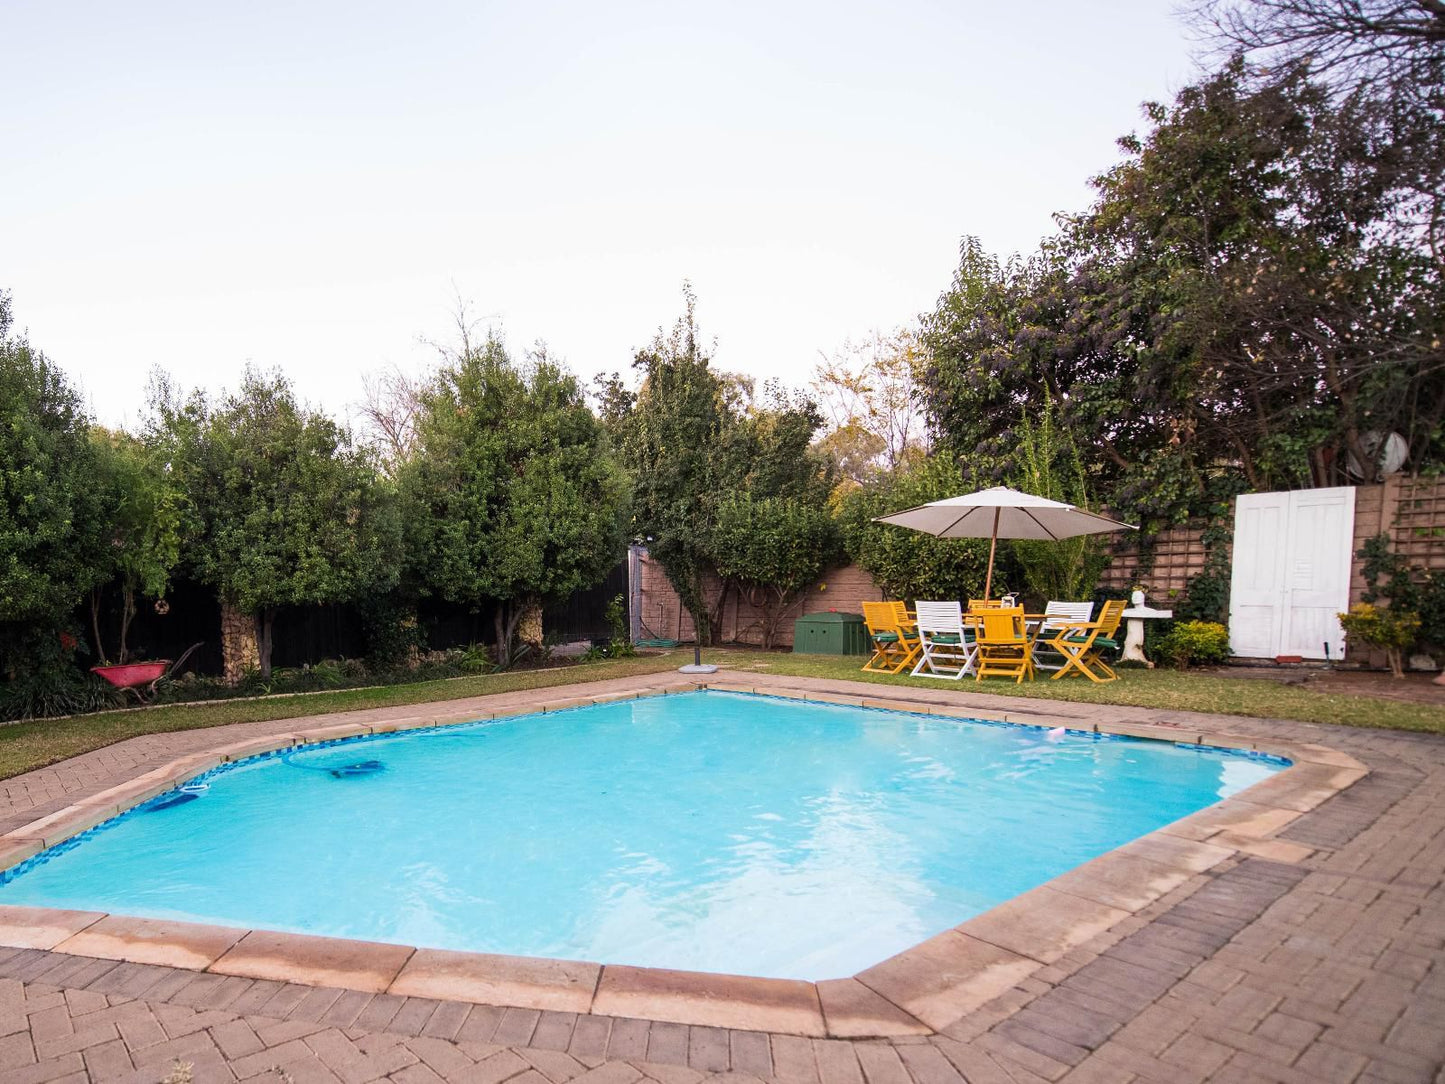 Cottonwood Guesthouse Oasis Dan Pienaar Bloemfontein Free State South Africa Complementary Colors, Garden, Nature, Plant, Swimming Pool